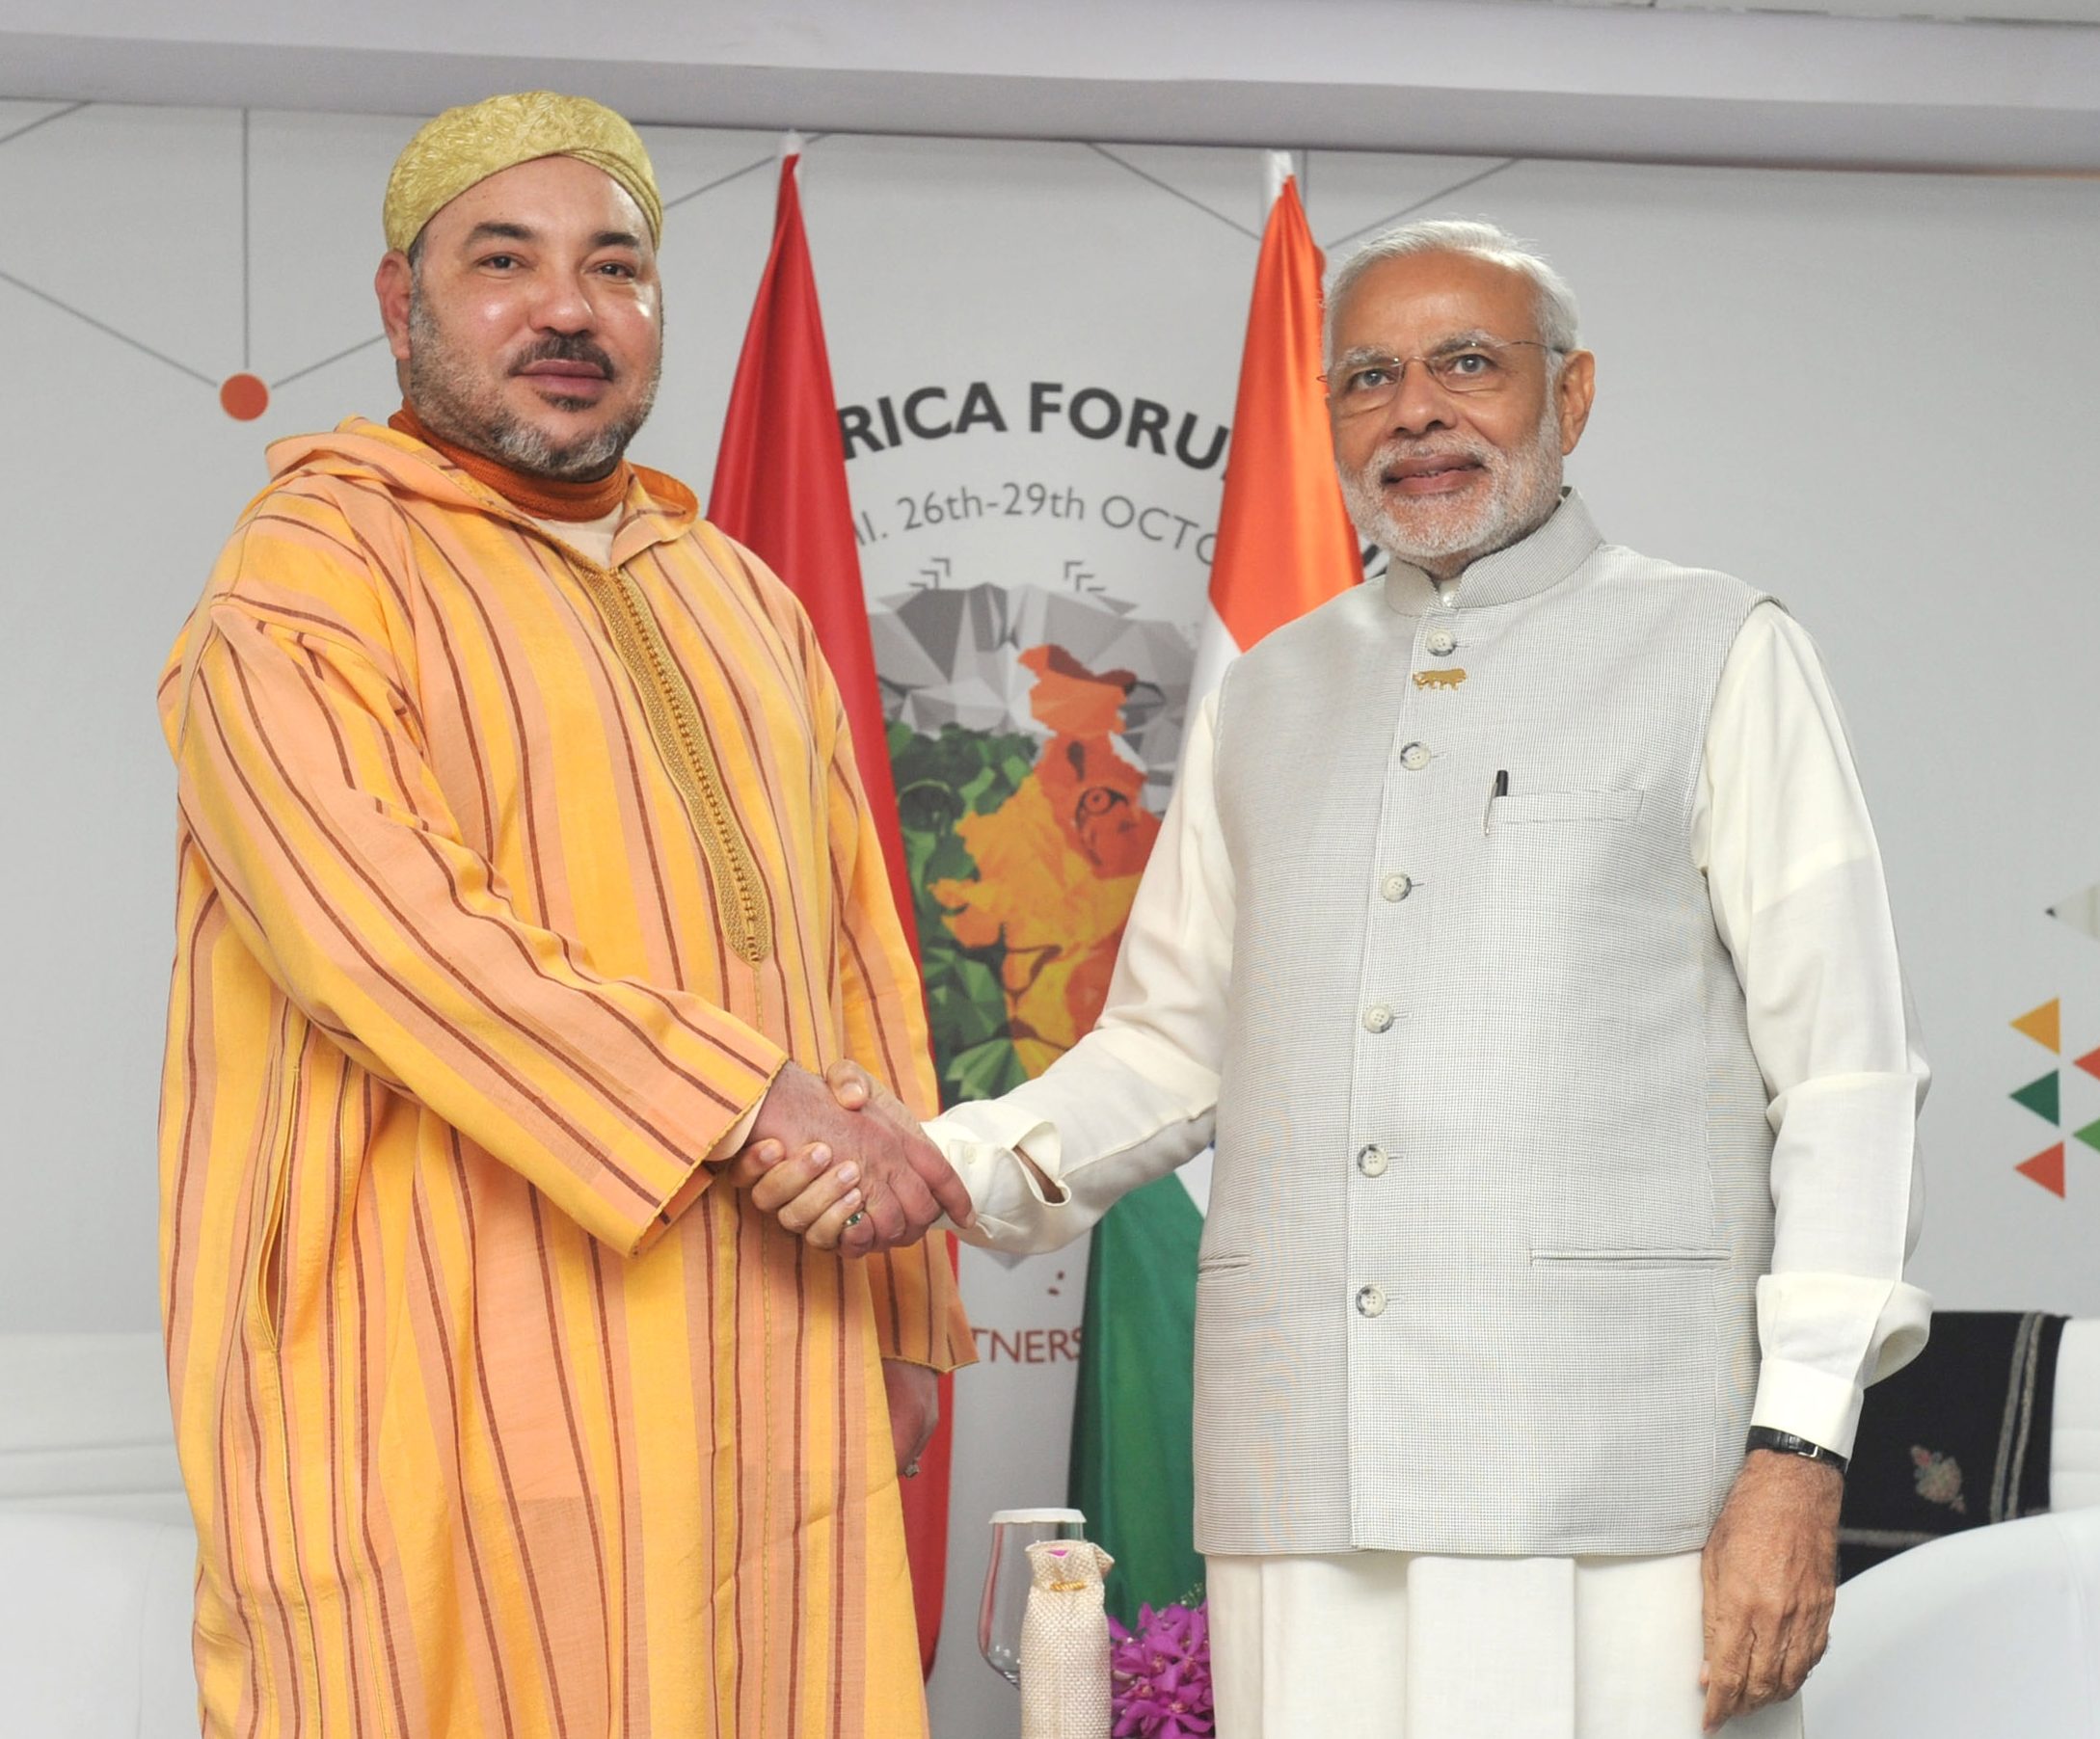 Morocco Bridges India with Francophone Africa, Times of India says